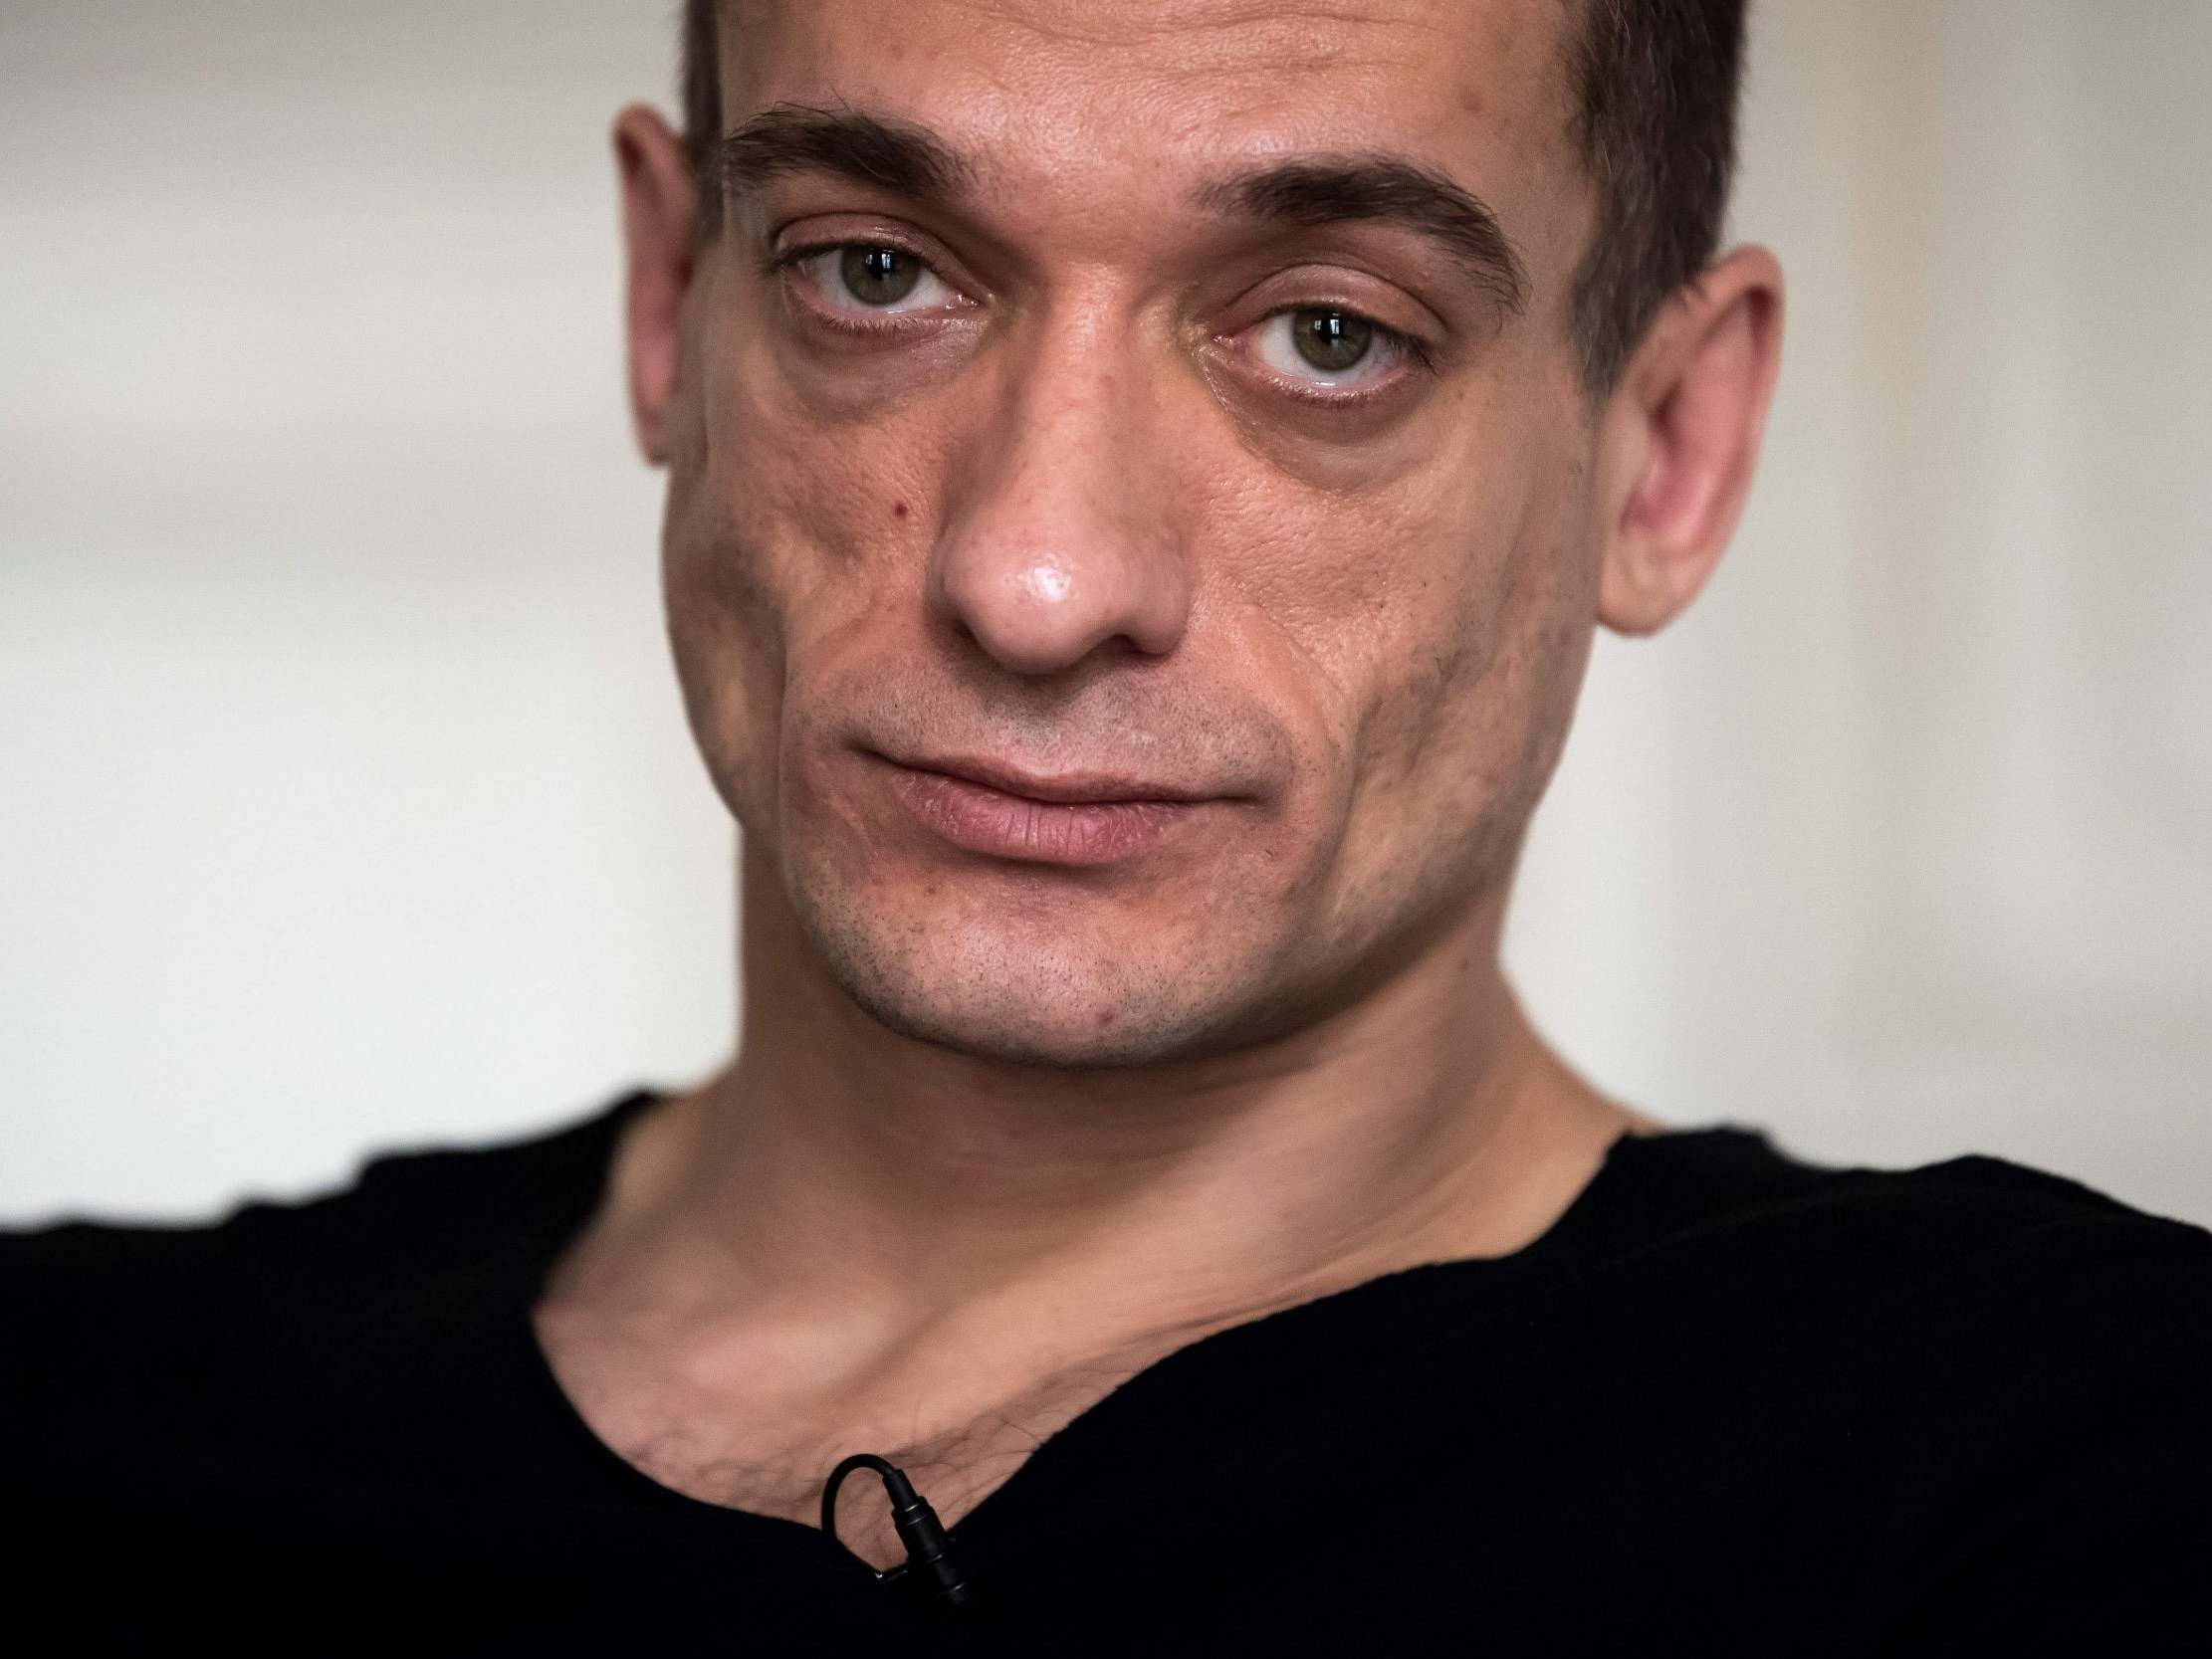 Russian artist Pyotr Pavlensky has claimed he posted the compromising videos online